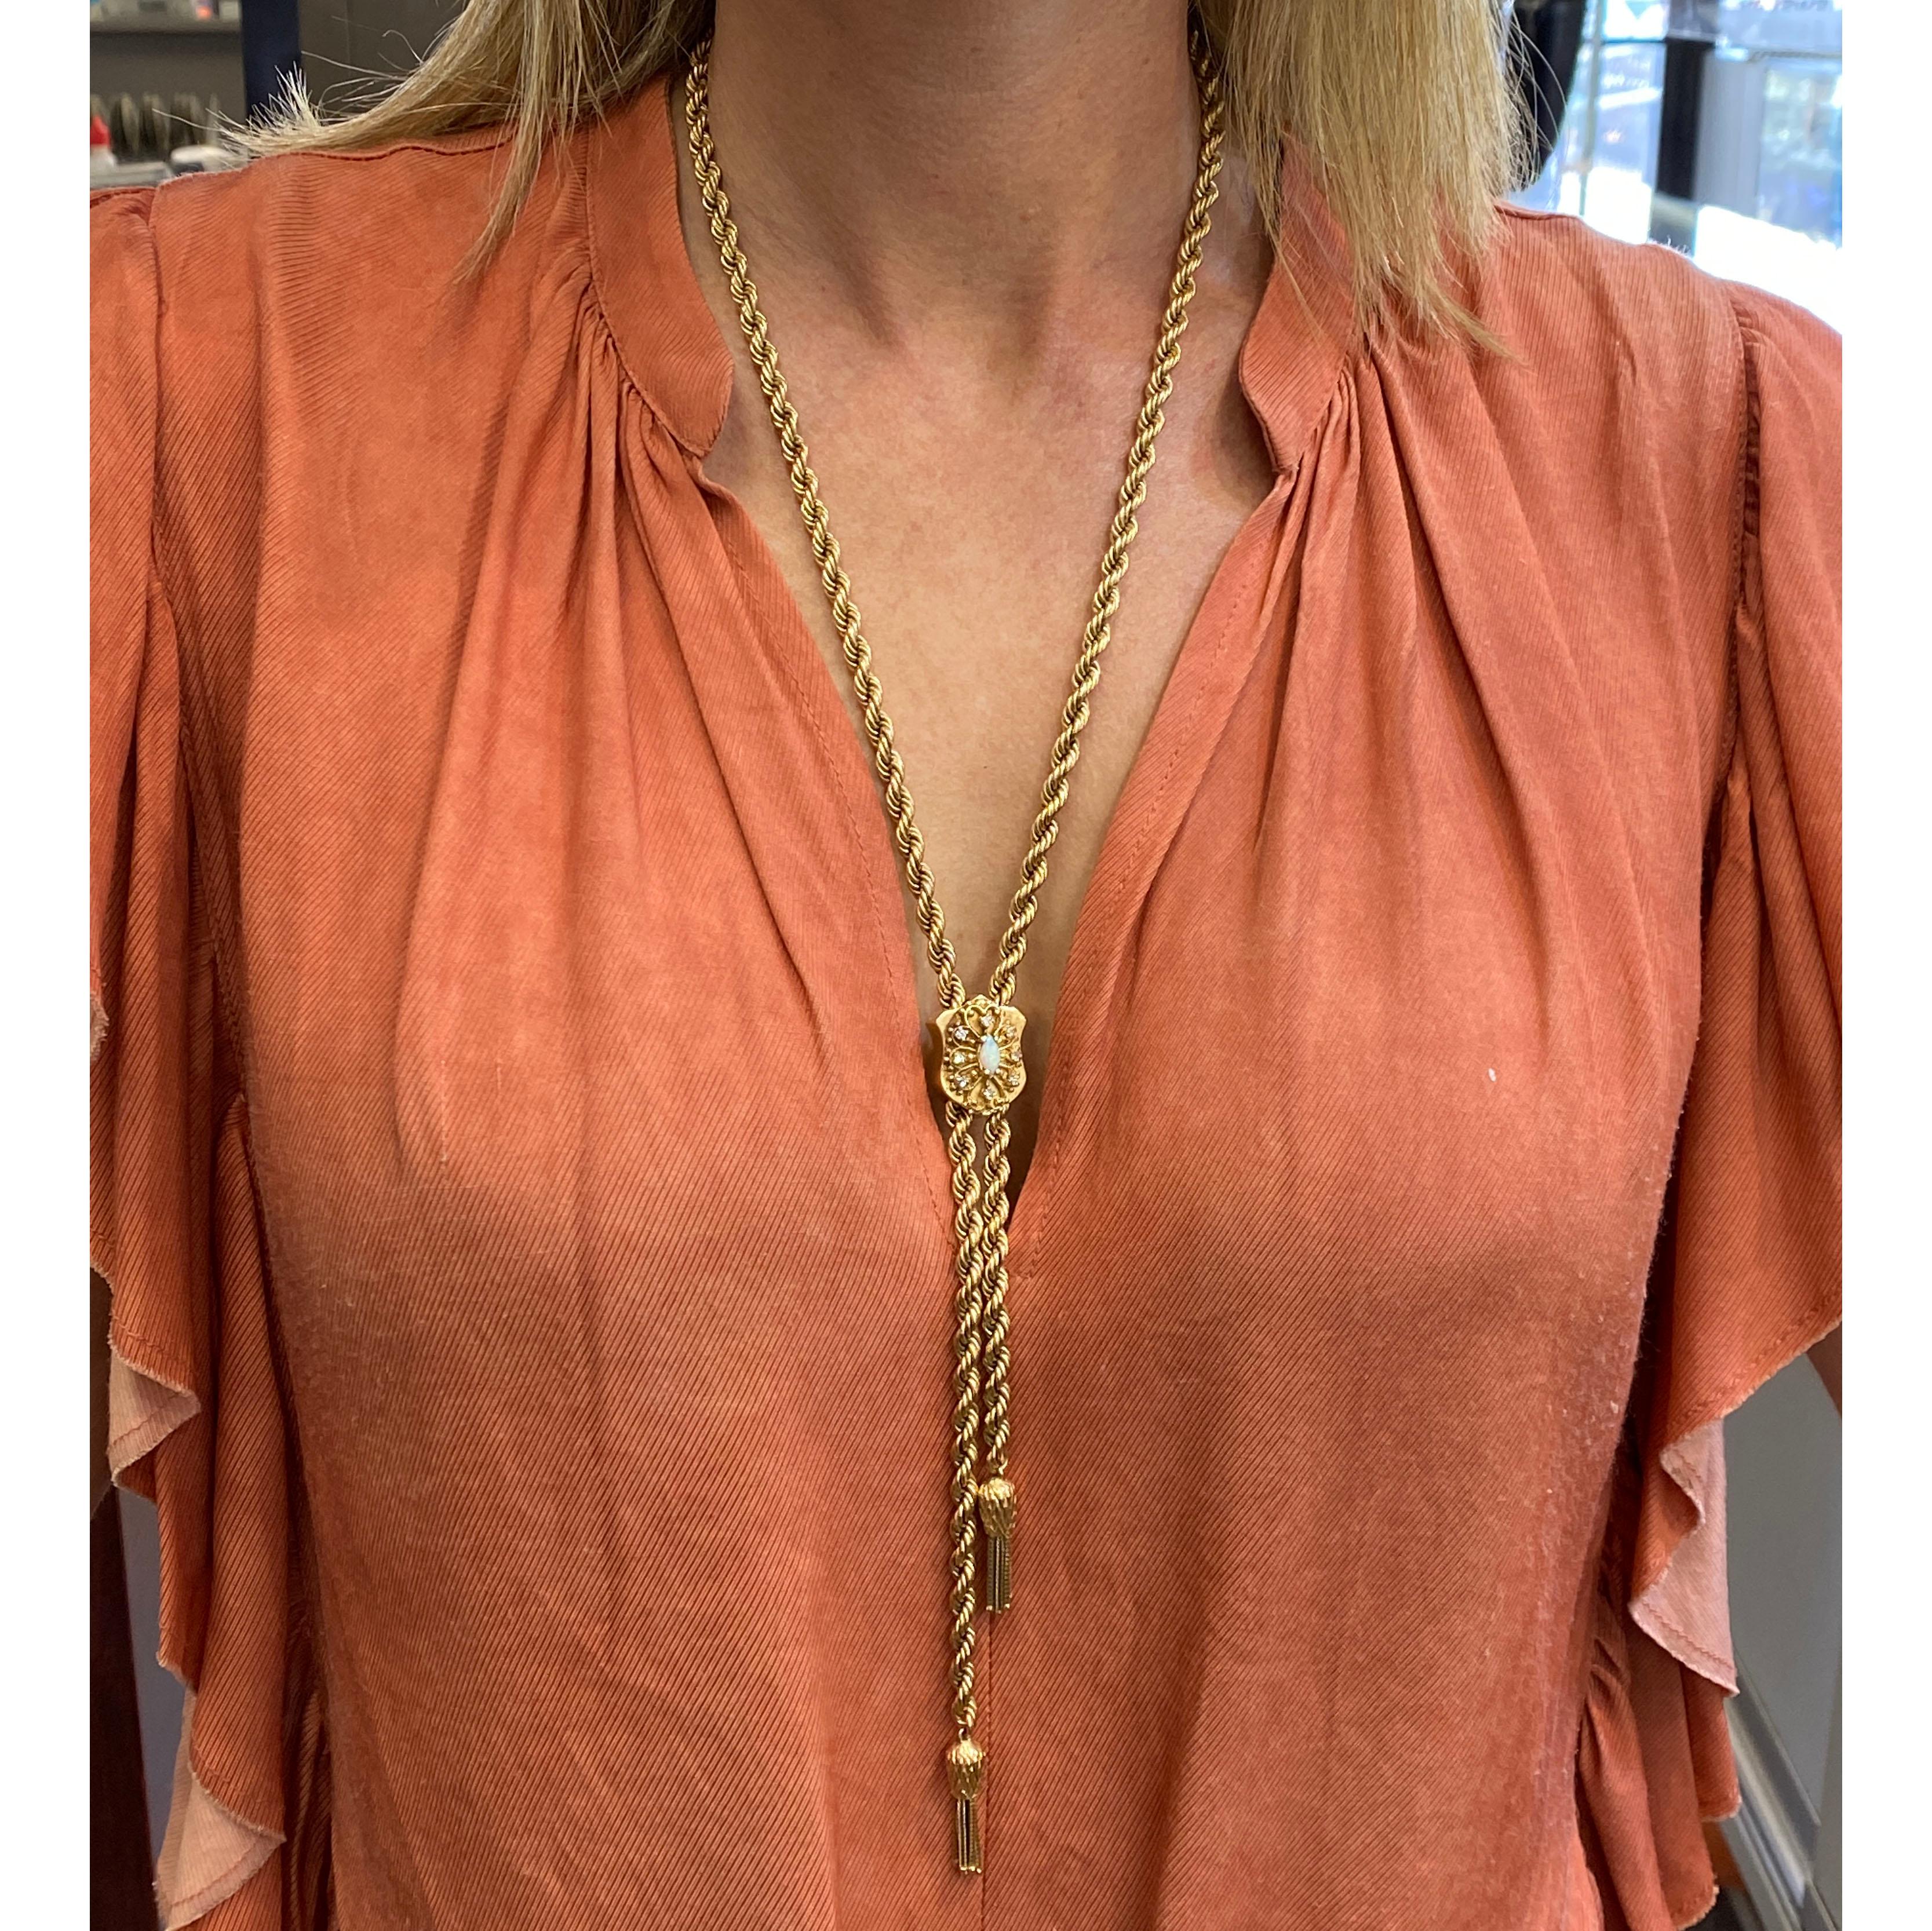 Diamond and opal lariat rope necklace fashioned in 14 karat yellow gold. The lariat features an opal and 8 single cut diamonds weighing .24 carat total weight and graded H-I color and VS clarity. The adjustable necklace measures 30 inches in length